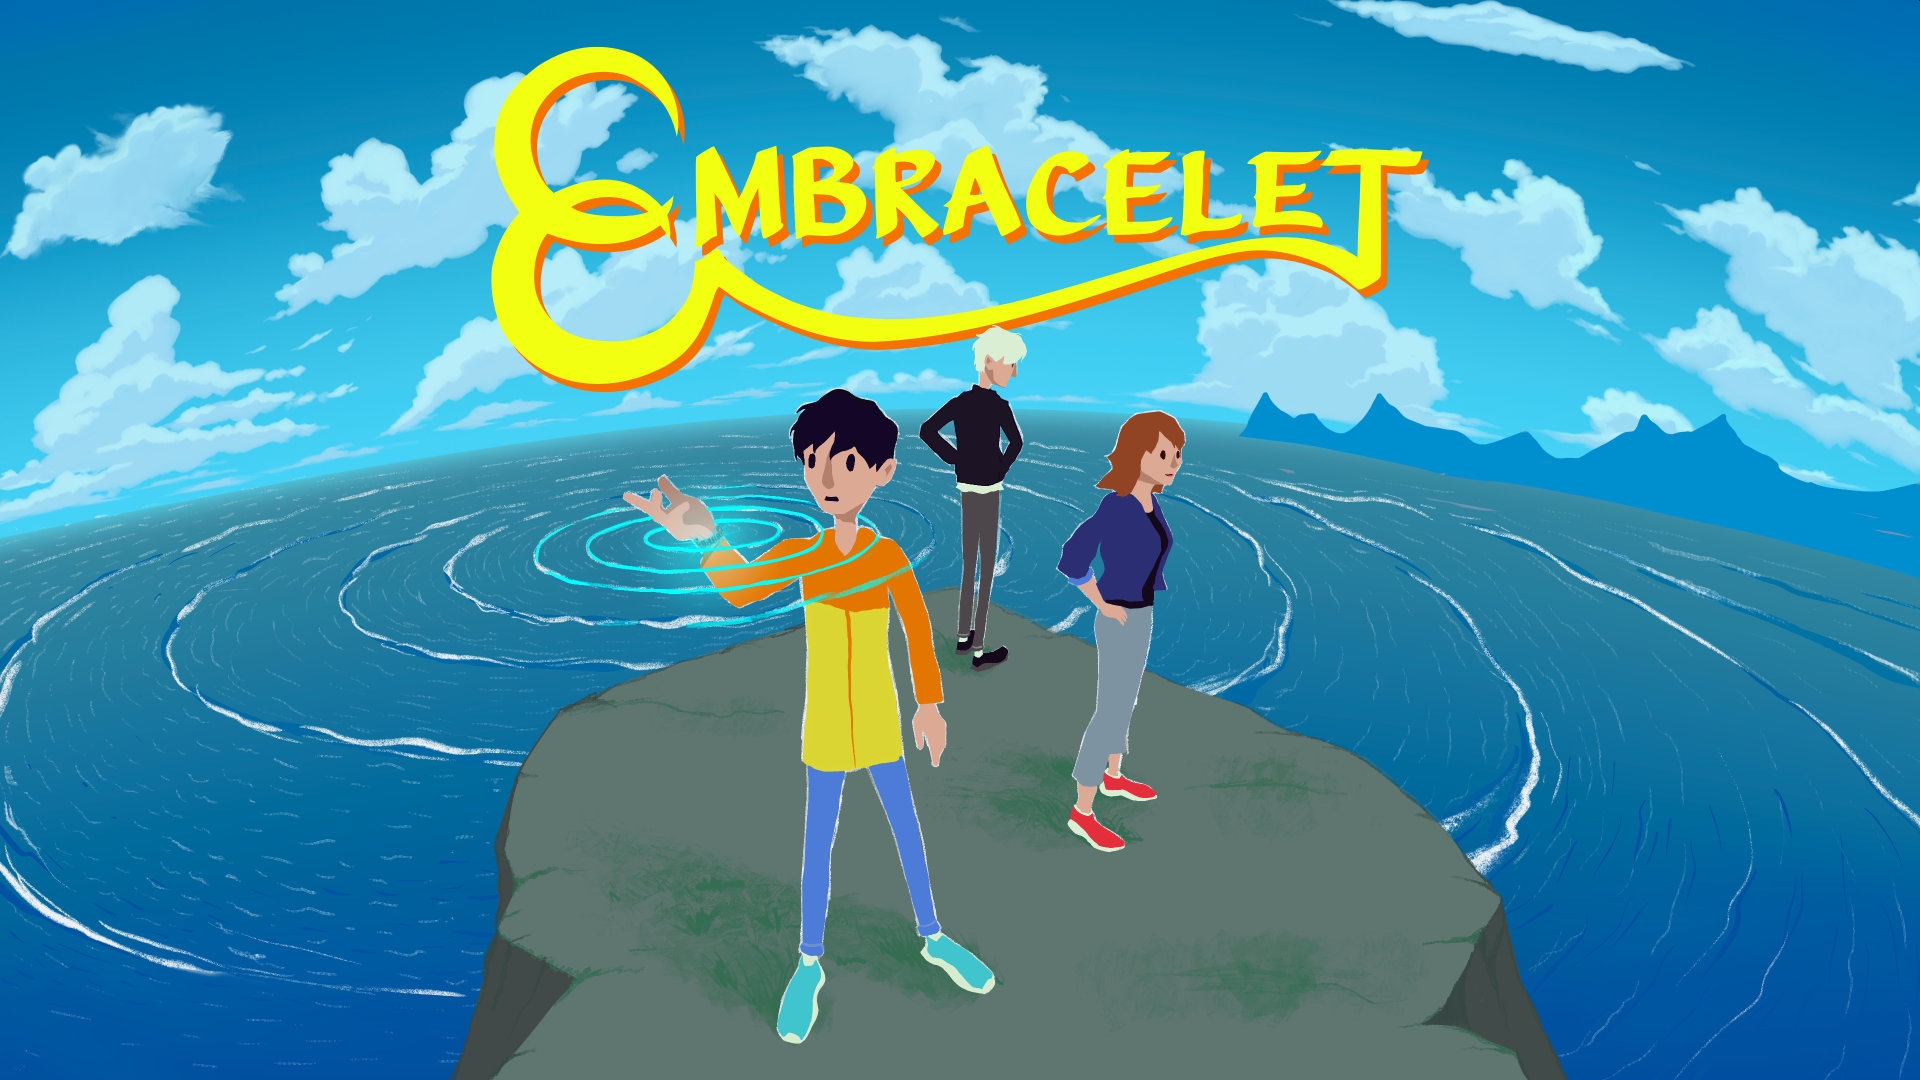 Coming-Of-Age Adventure Game Embracelet Port Headed To iOS On November 26